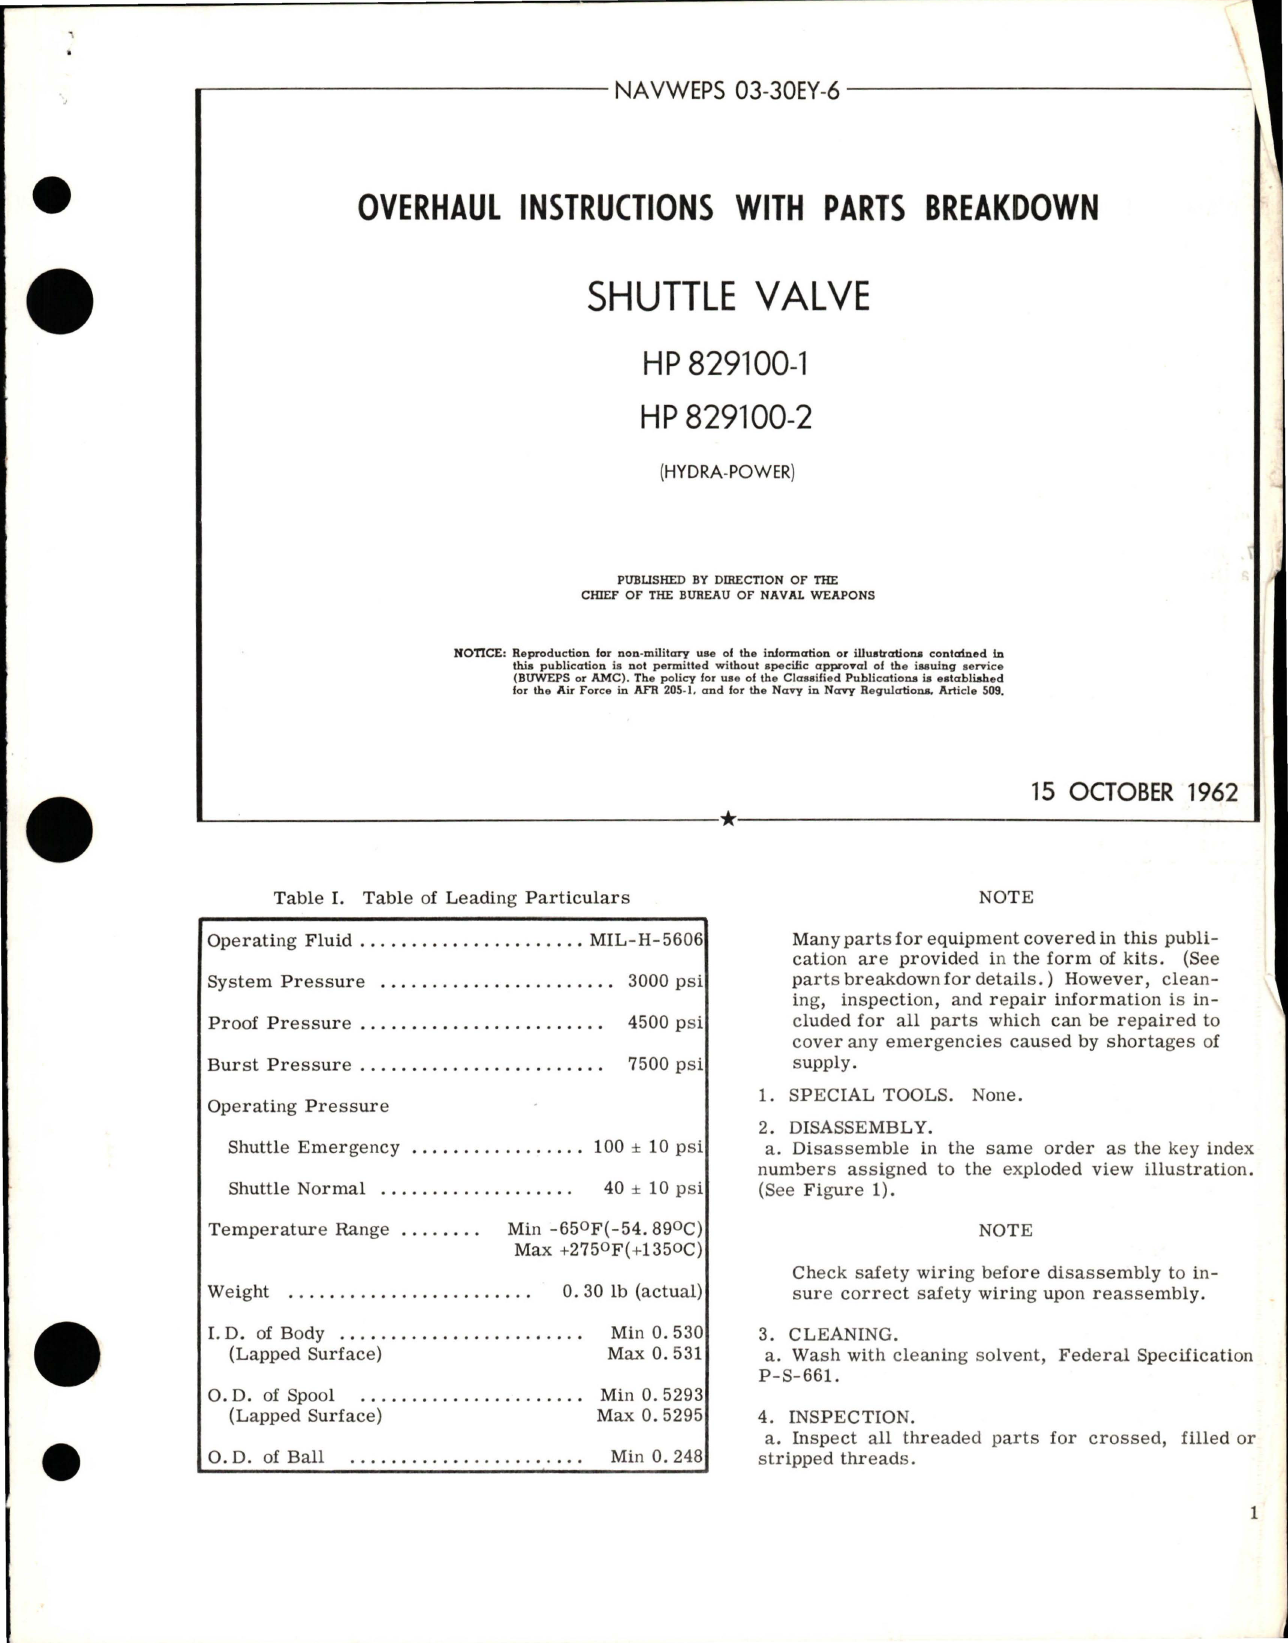 Sample page 1 from AirCorps Library document: Overhaul Instructions with Parts Breakdown for Shuttle Valve - HP 829100-1 and HP 829100-2